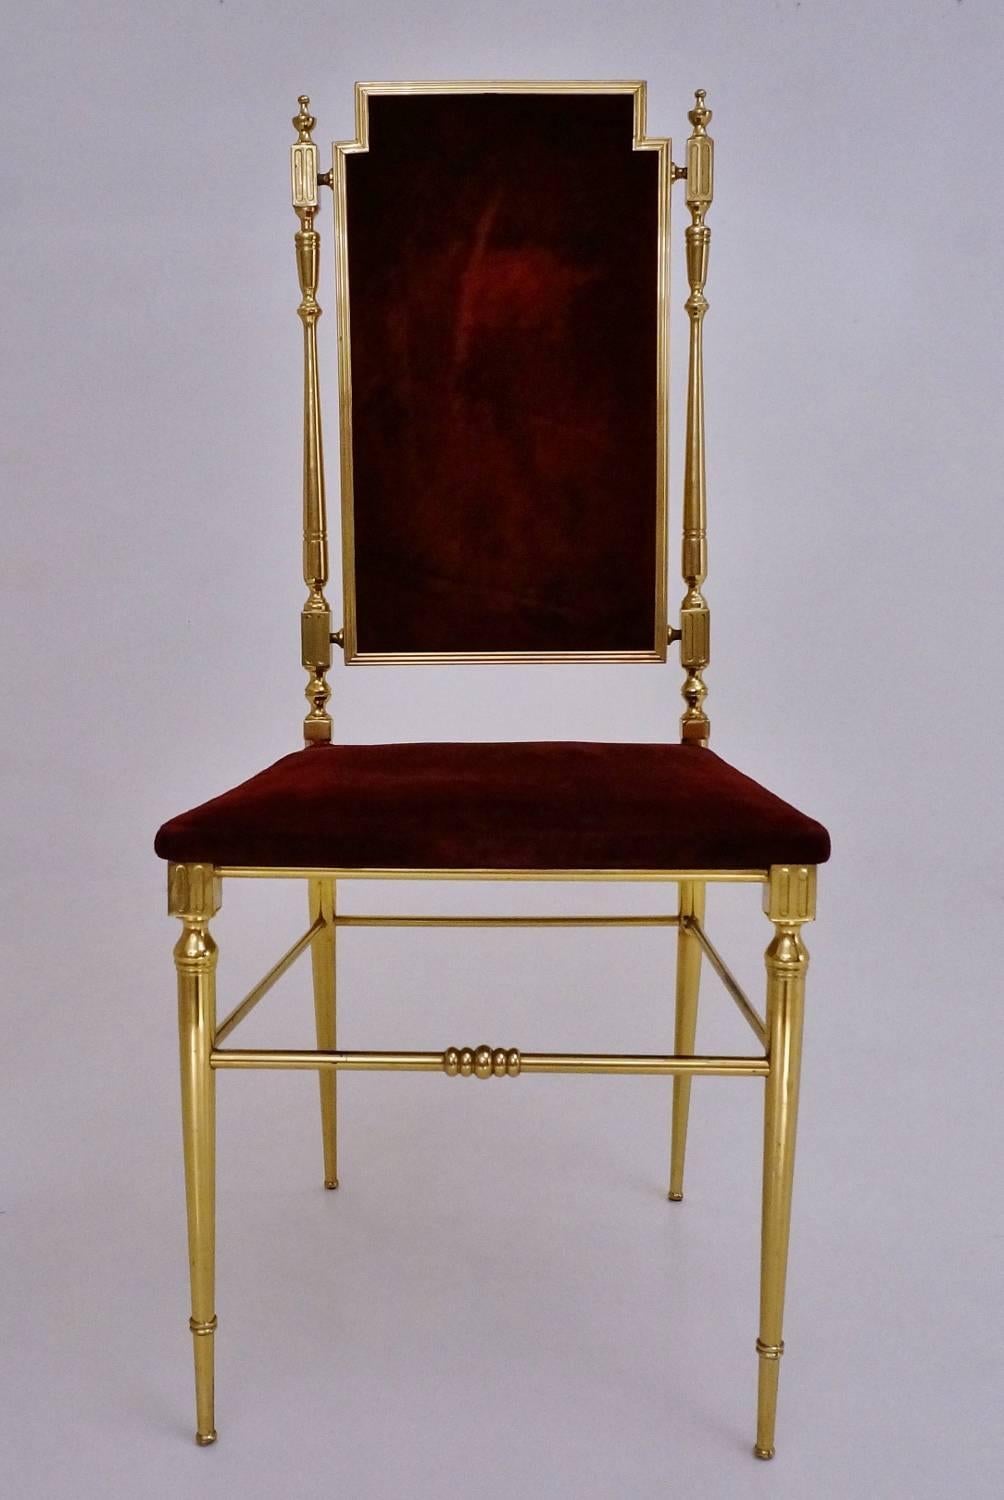 Neoclassical brass chair with original scarlet red velvet upholstery, French, circa 1950s.

This vintage chair has been thoroughly cleaned respecting the original antique patina on the brass, and is ready to use.

This neoclassical design is a